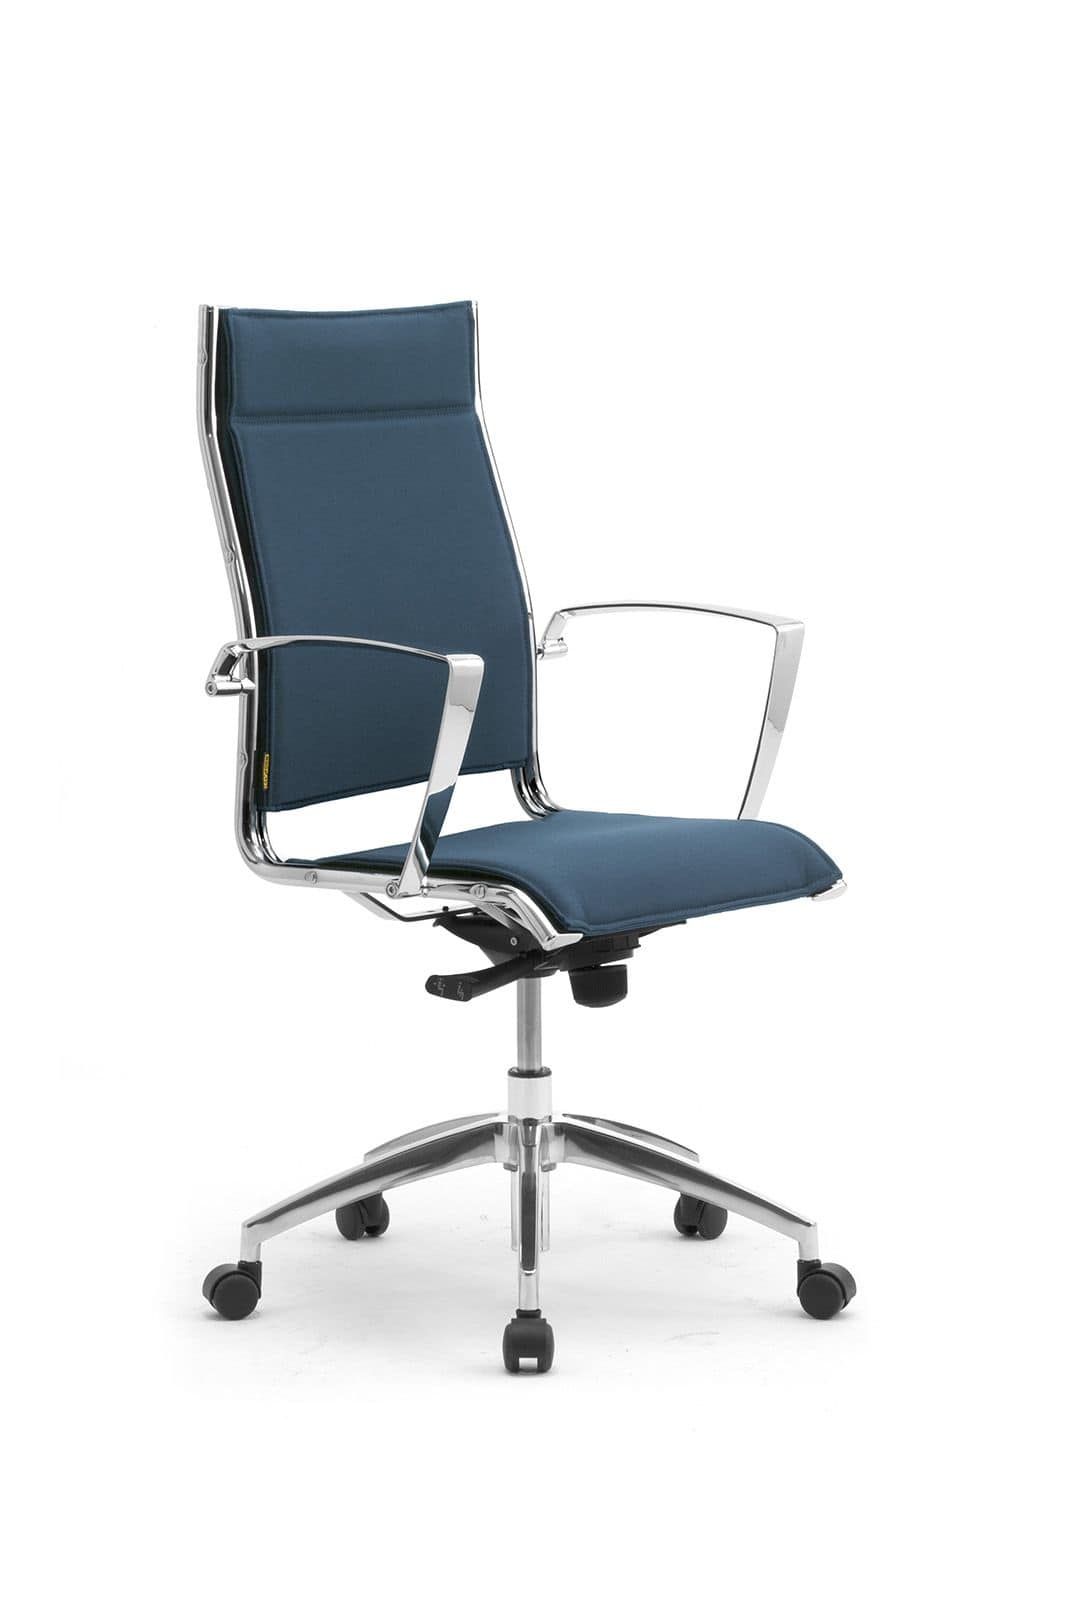 https://www.idfdesign.com/images/ergonomic-office-chairs/origami-x-office-chair-with-castors.jpg